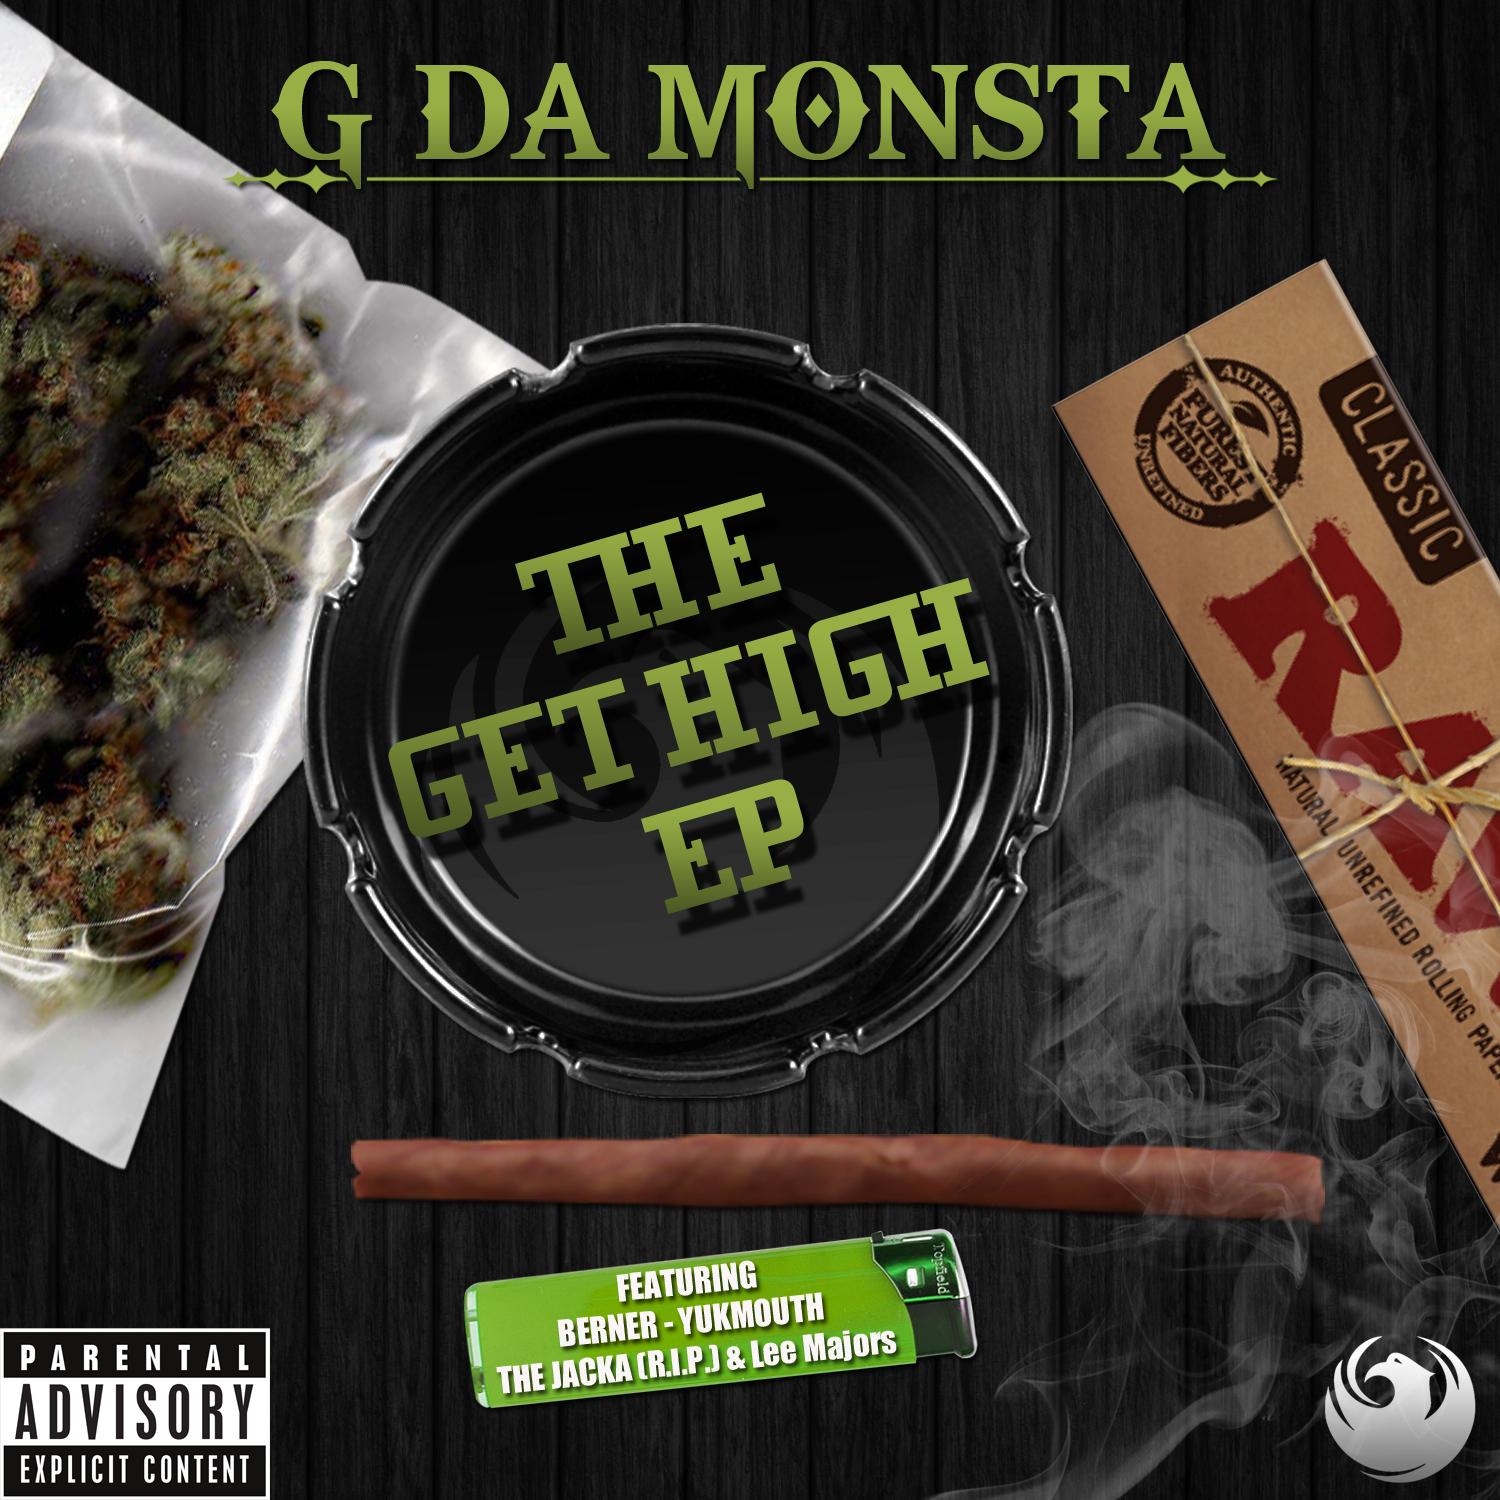 The Get High Ep